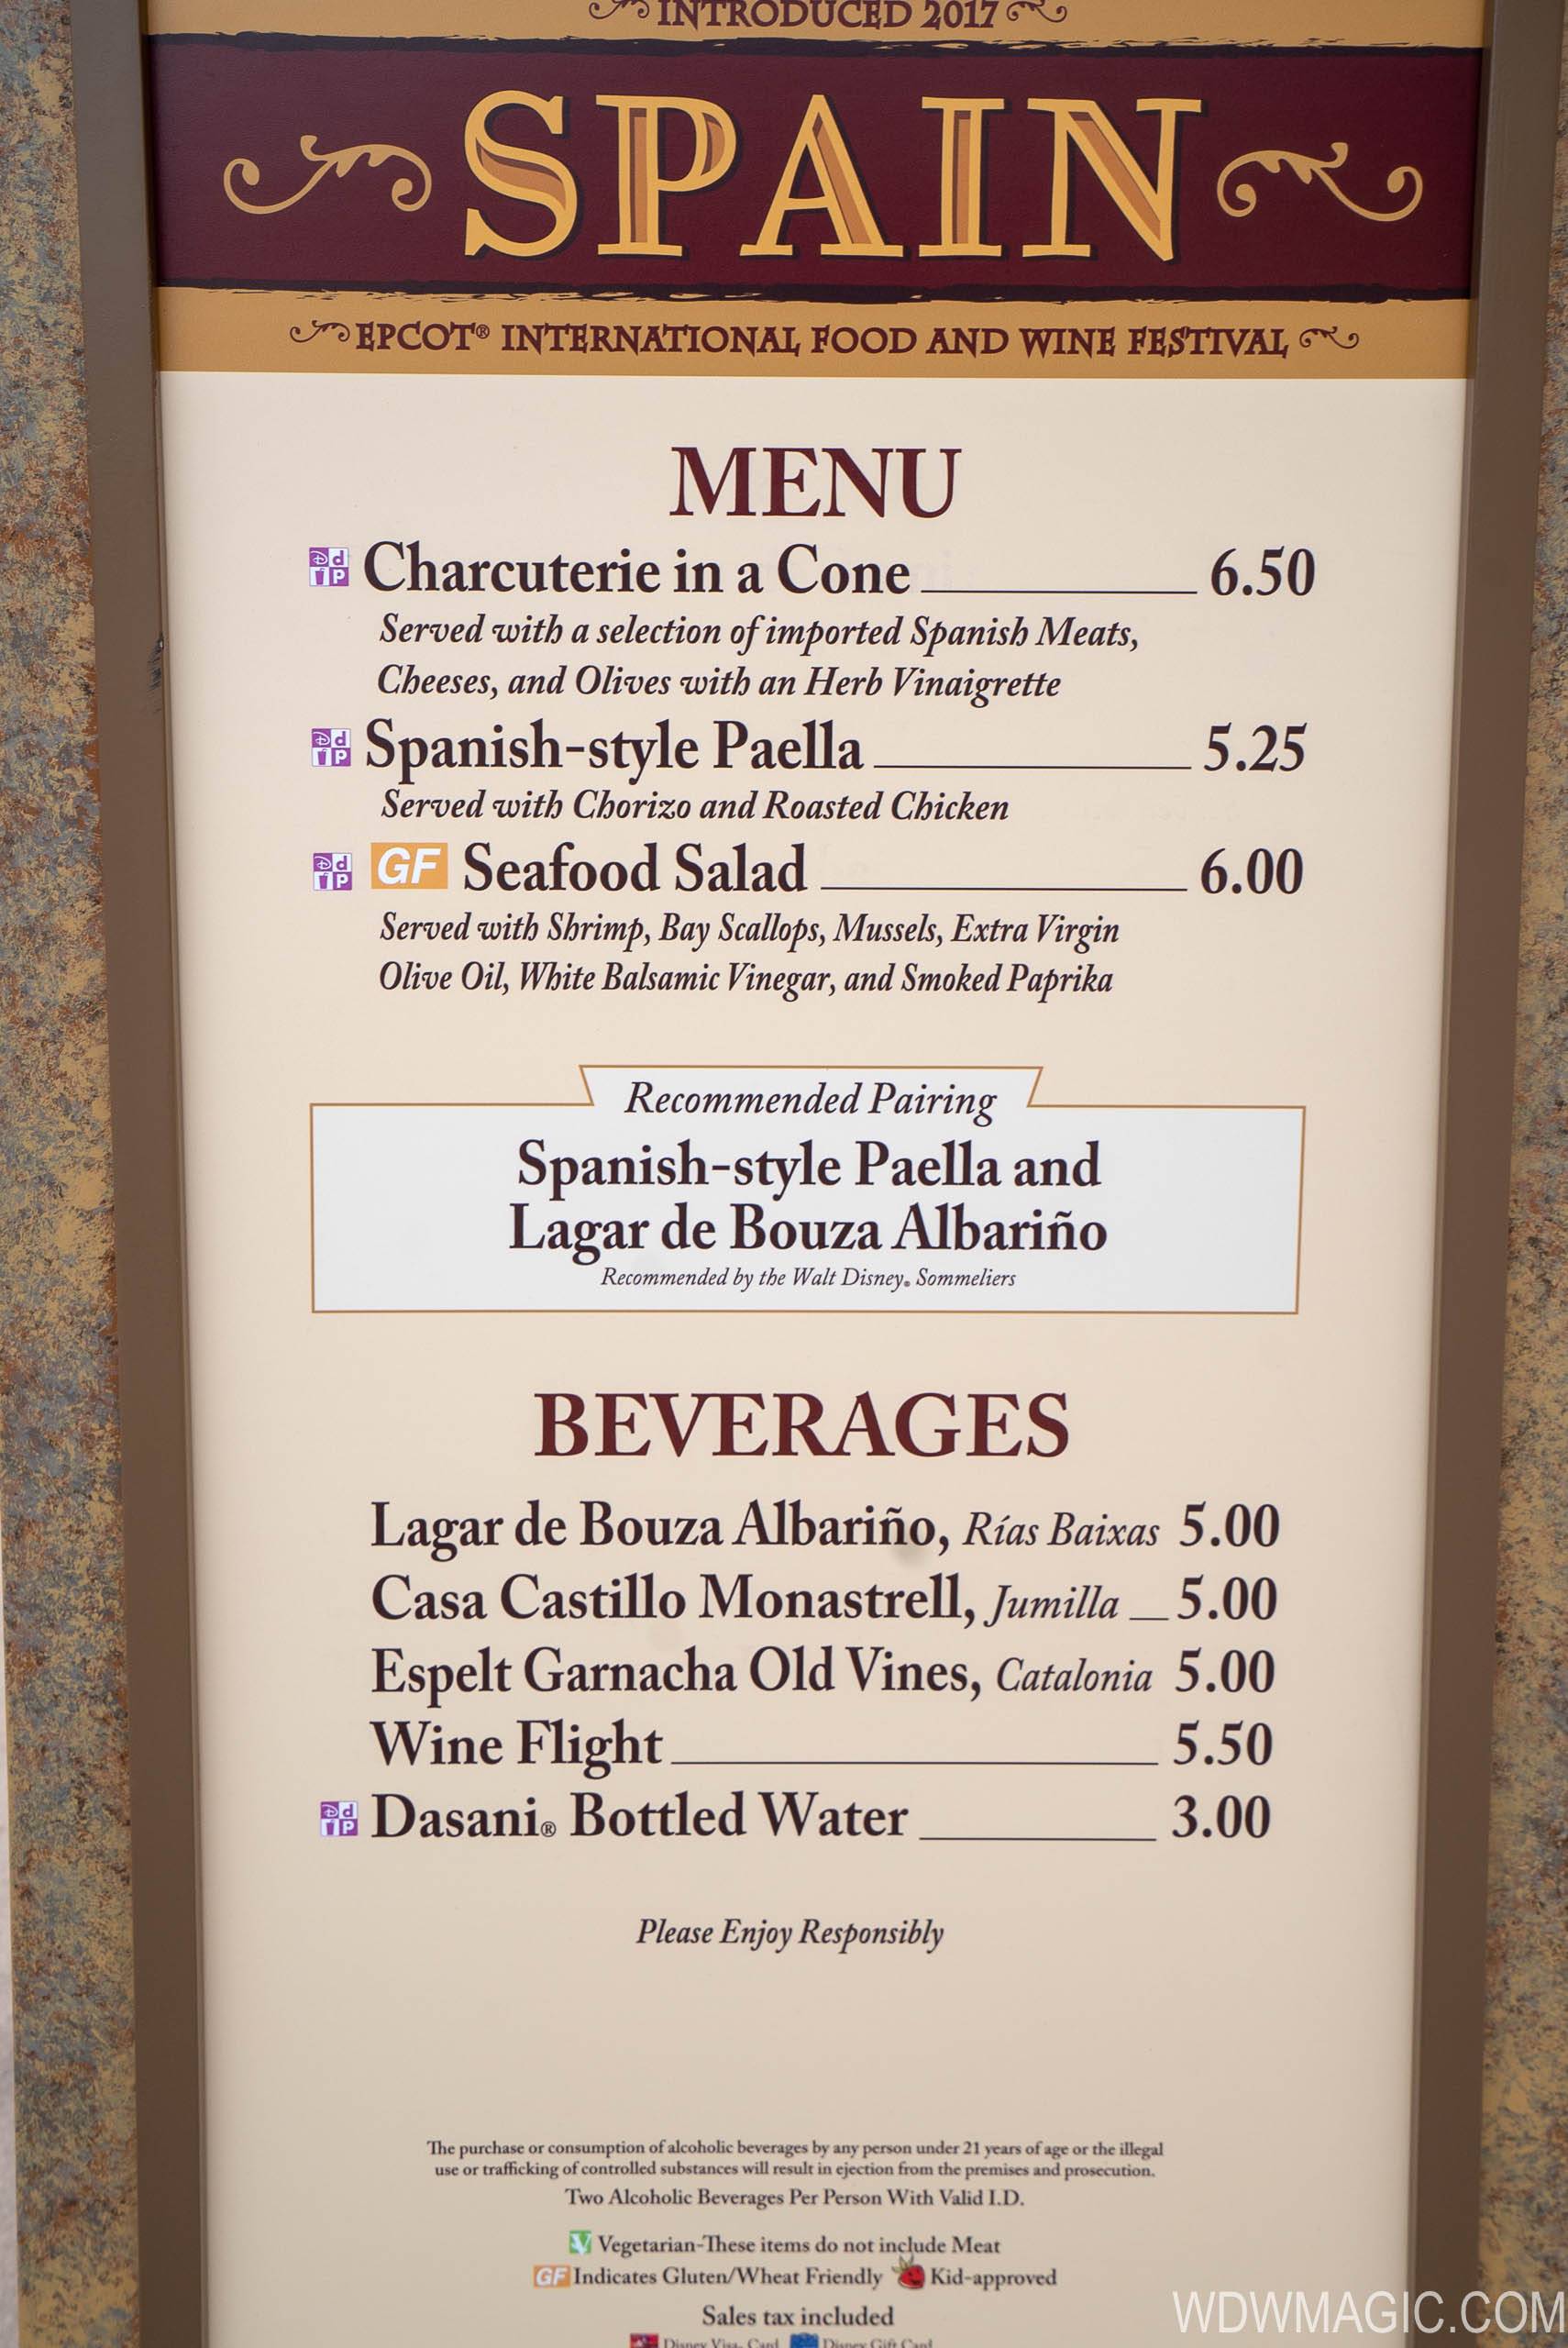 PHOTOS - Photo tour around all of the 2018 Epcot International Food and Wine Festival kiosks with menus and pricing